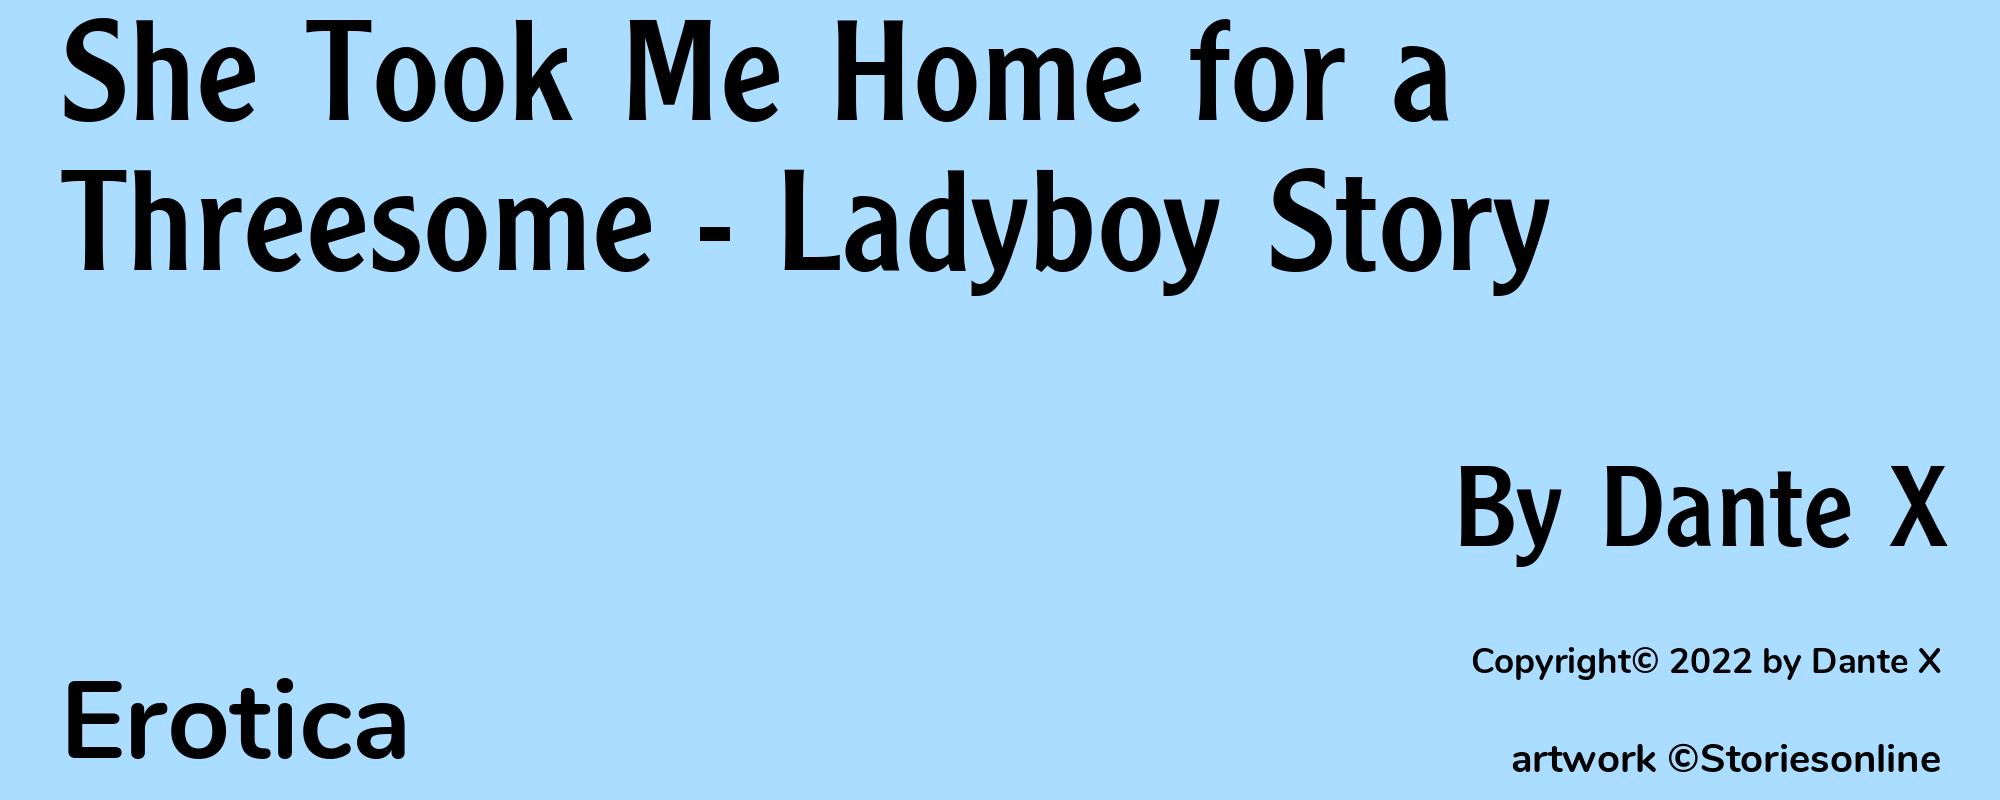 She Took Me Home for a Threesome - Ladyboy Story - Cover